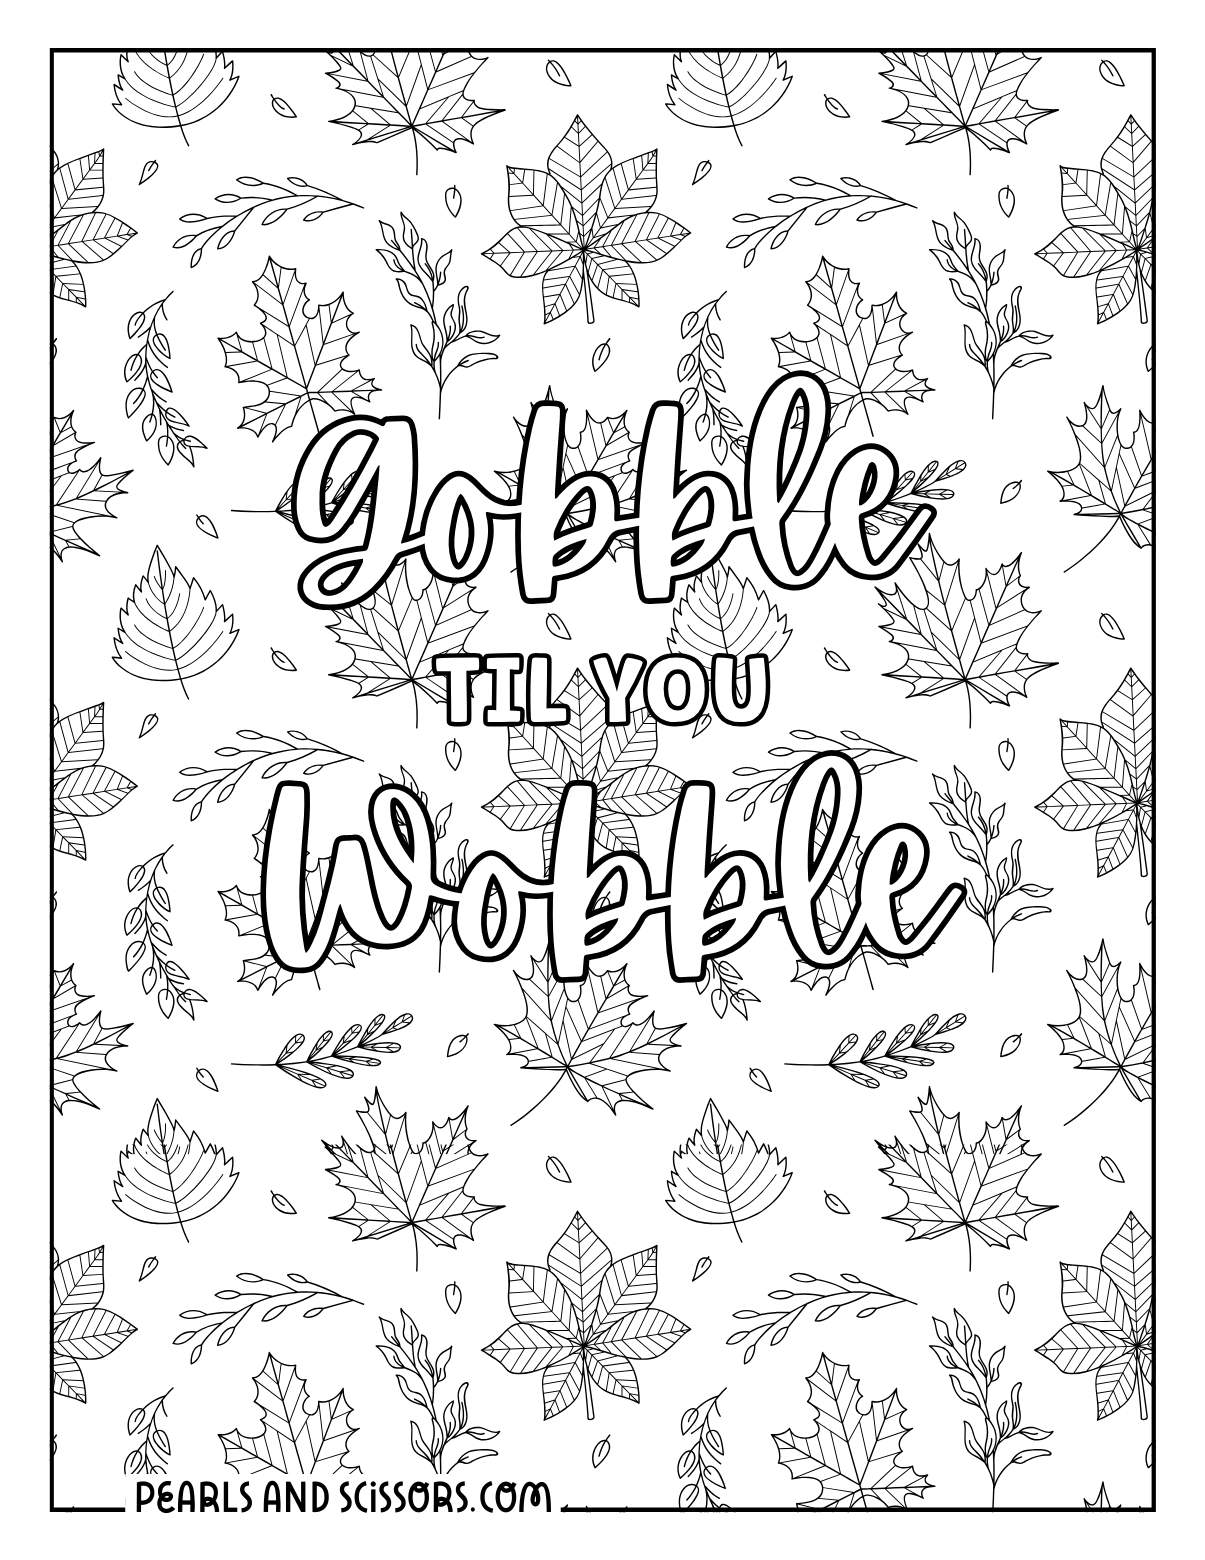 Gobble wobble thanksgiving coloring page with fall leaves.